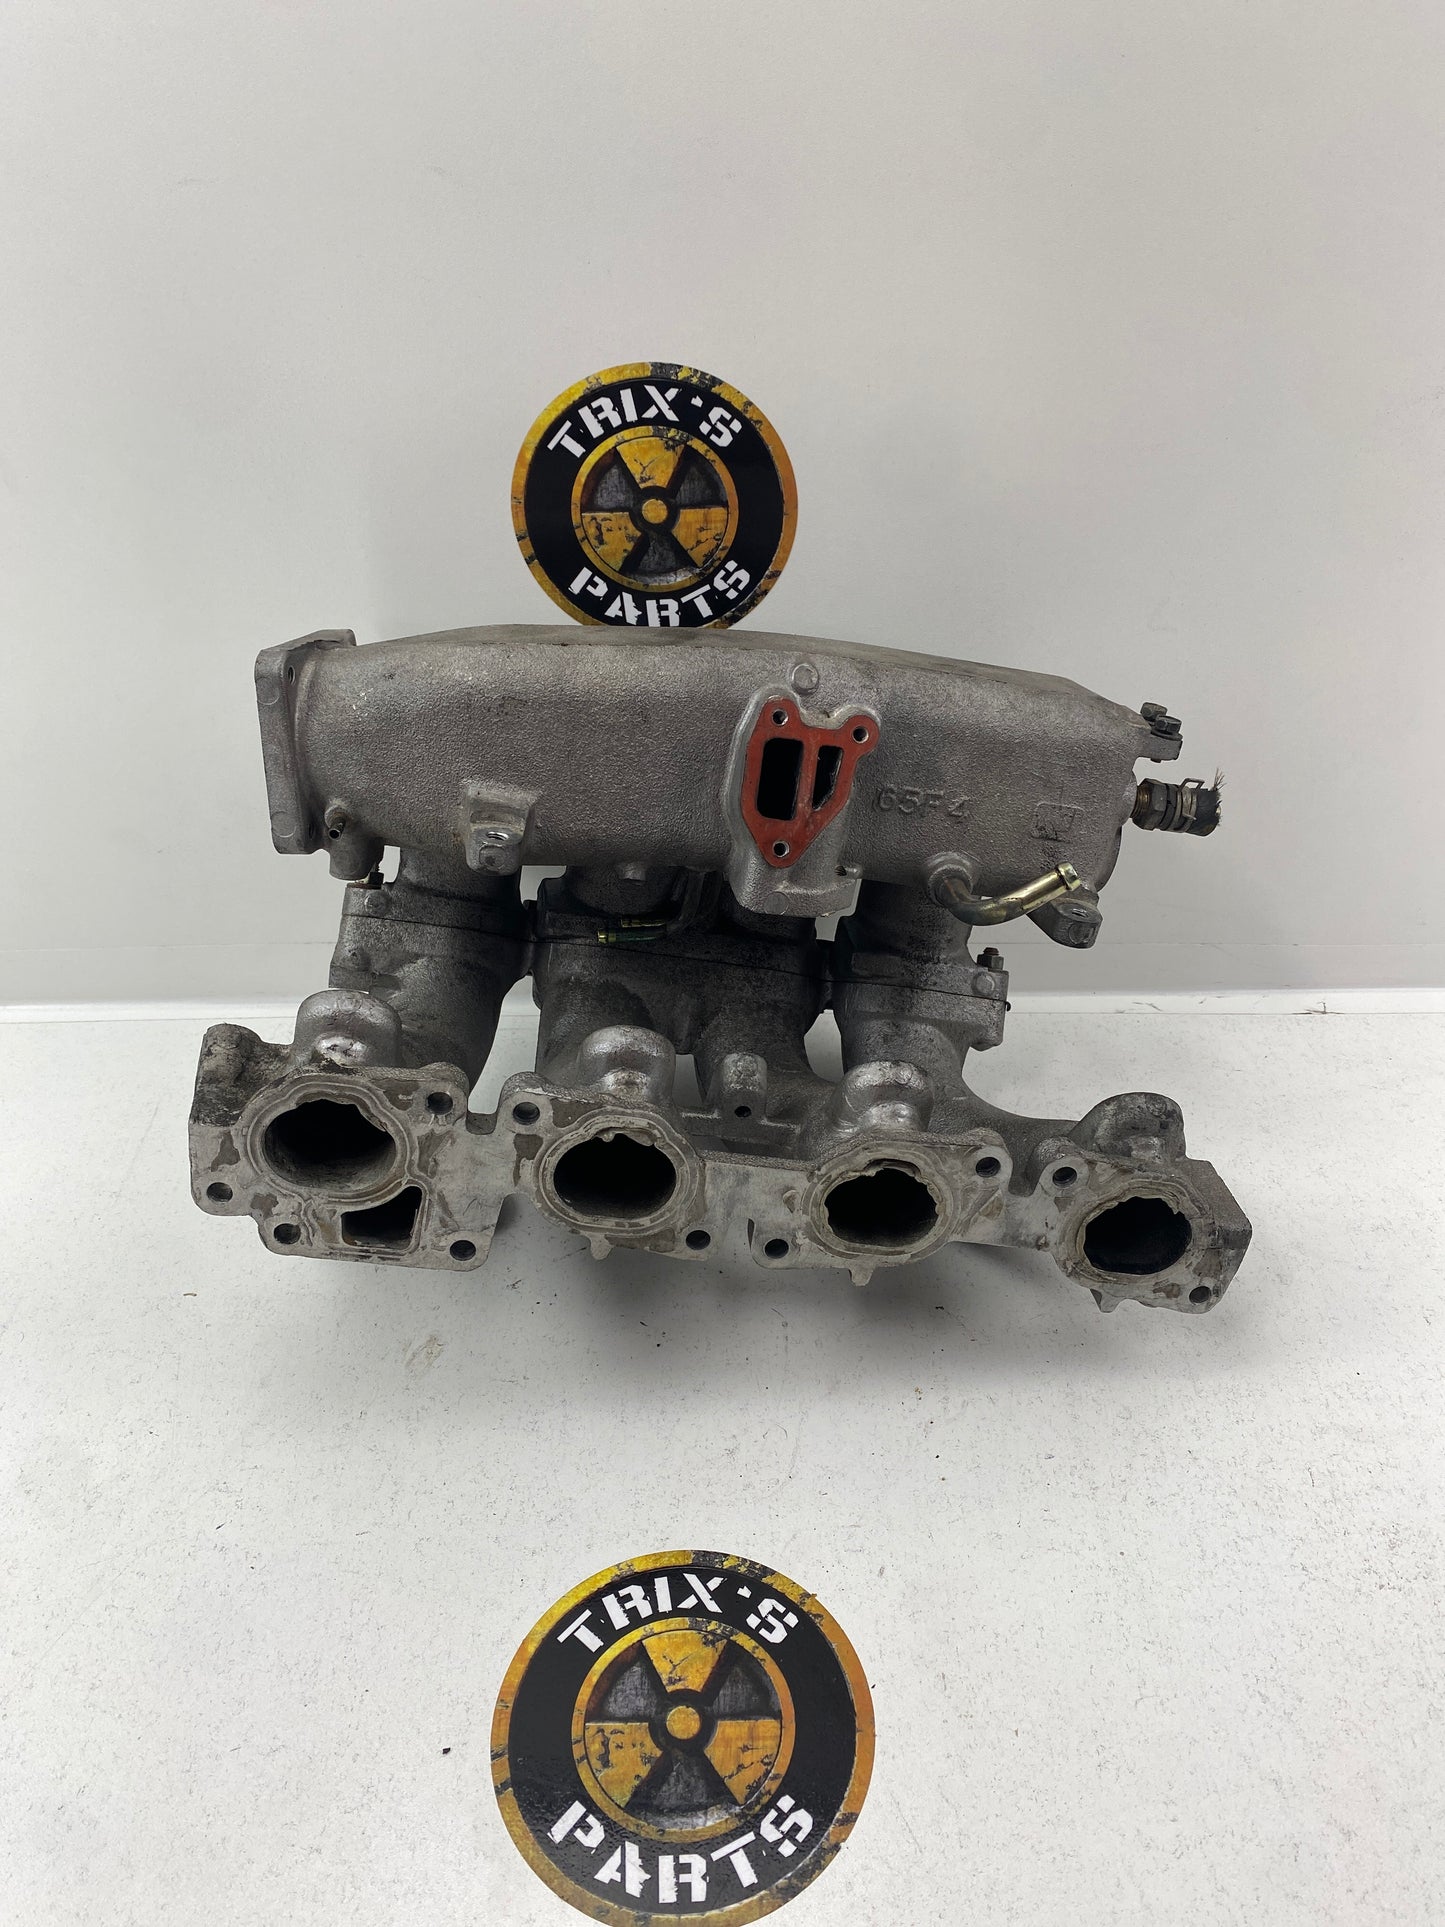 Used Good Condition Complete Bare VCT Intake Manifold to Suit S14 and S15 Silvia SR20DET